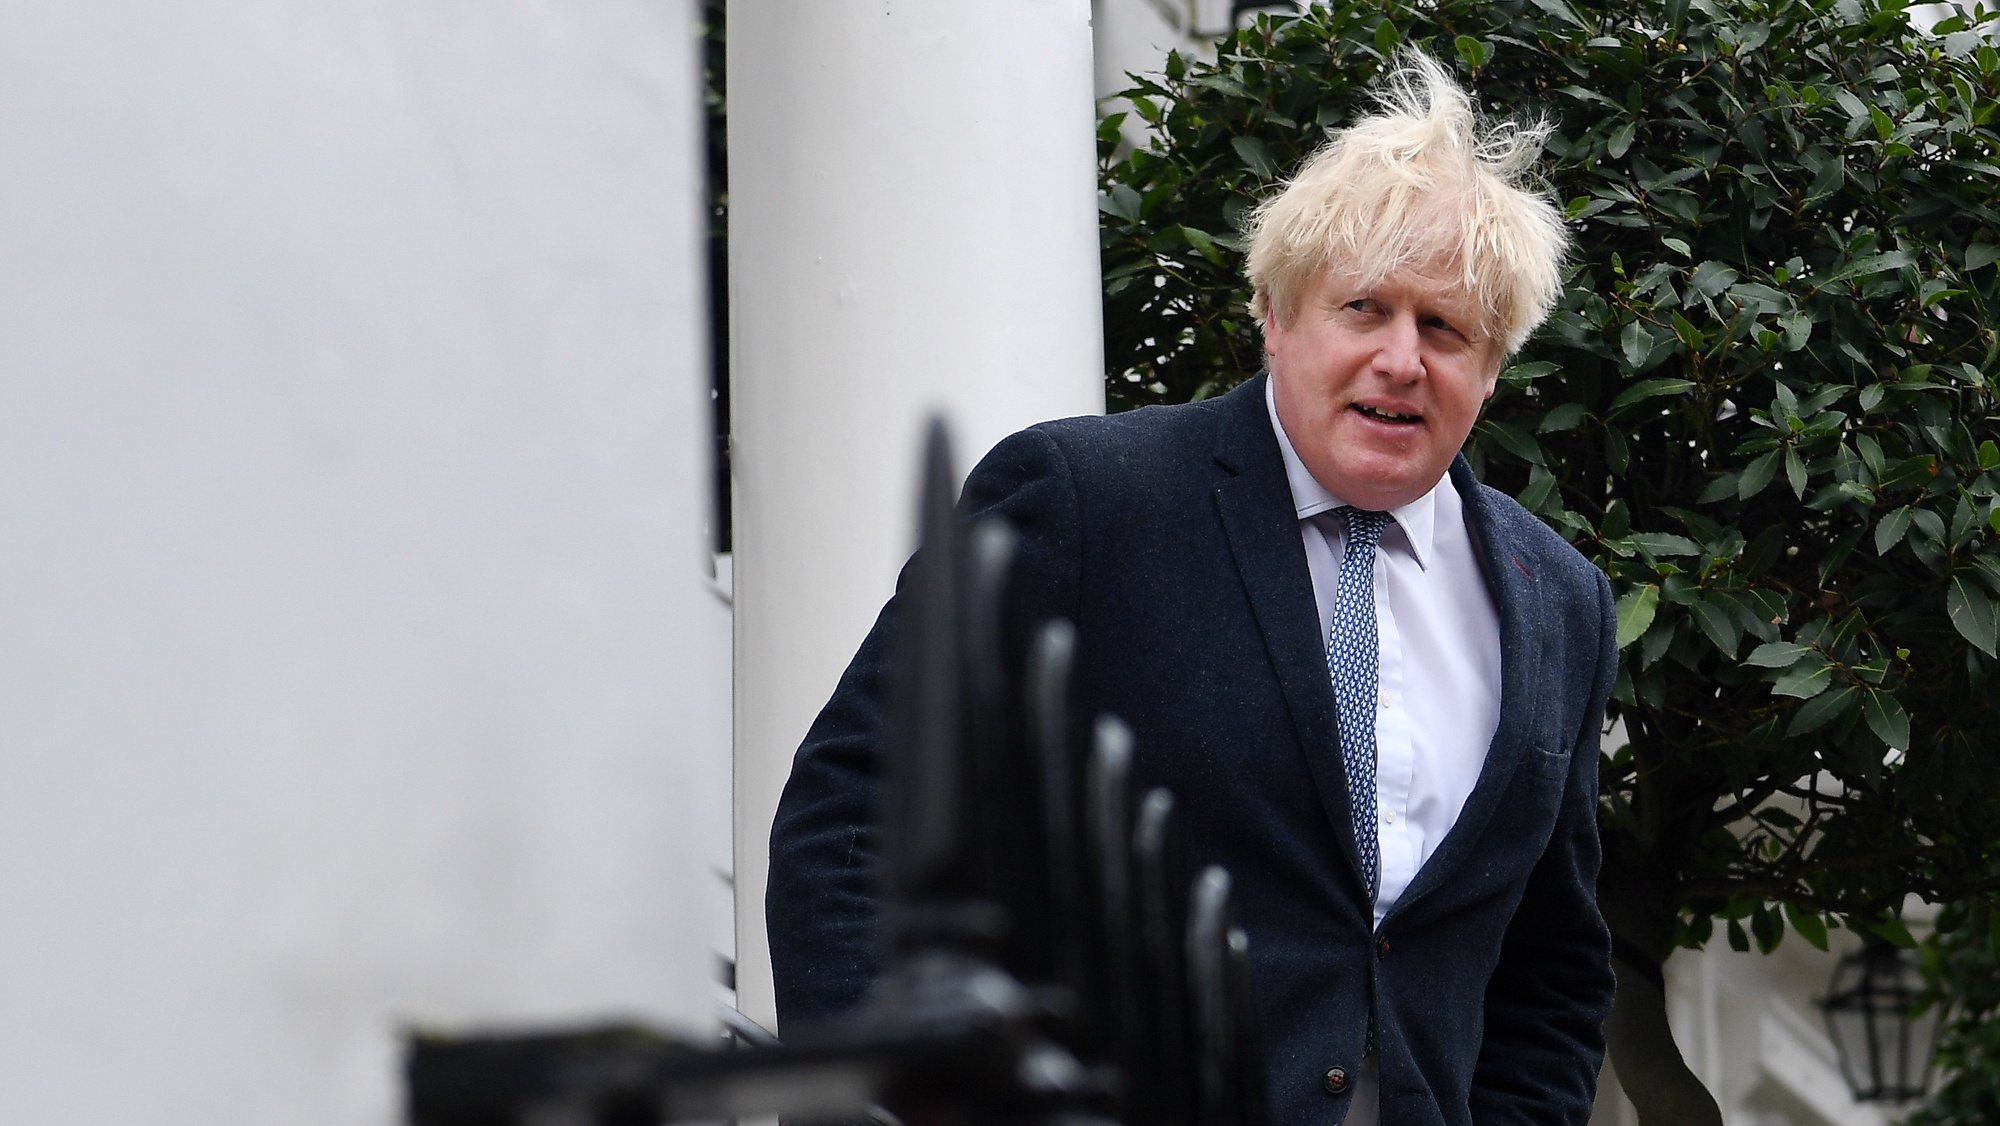 epa10534791 Former British Prime Minister Boris Johnson outside his home in London, Britain, 21 March 2023. Johnson is set to give evidence to MPs who are investigating accusations that he misled Parliament over Partygate, on 22 March.  EPA/ANDY RAIN